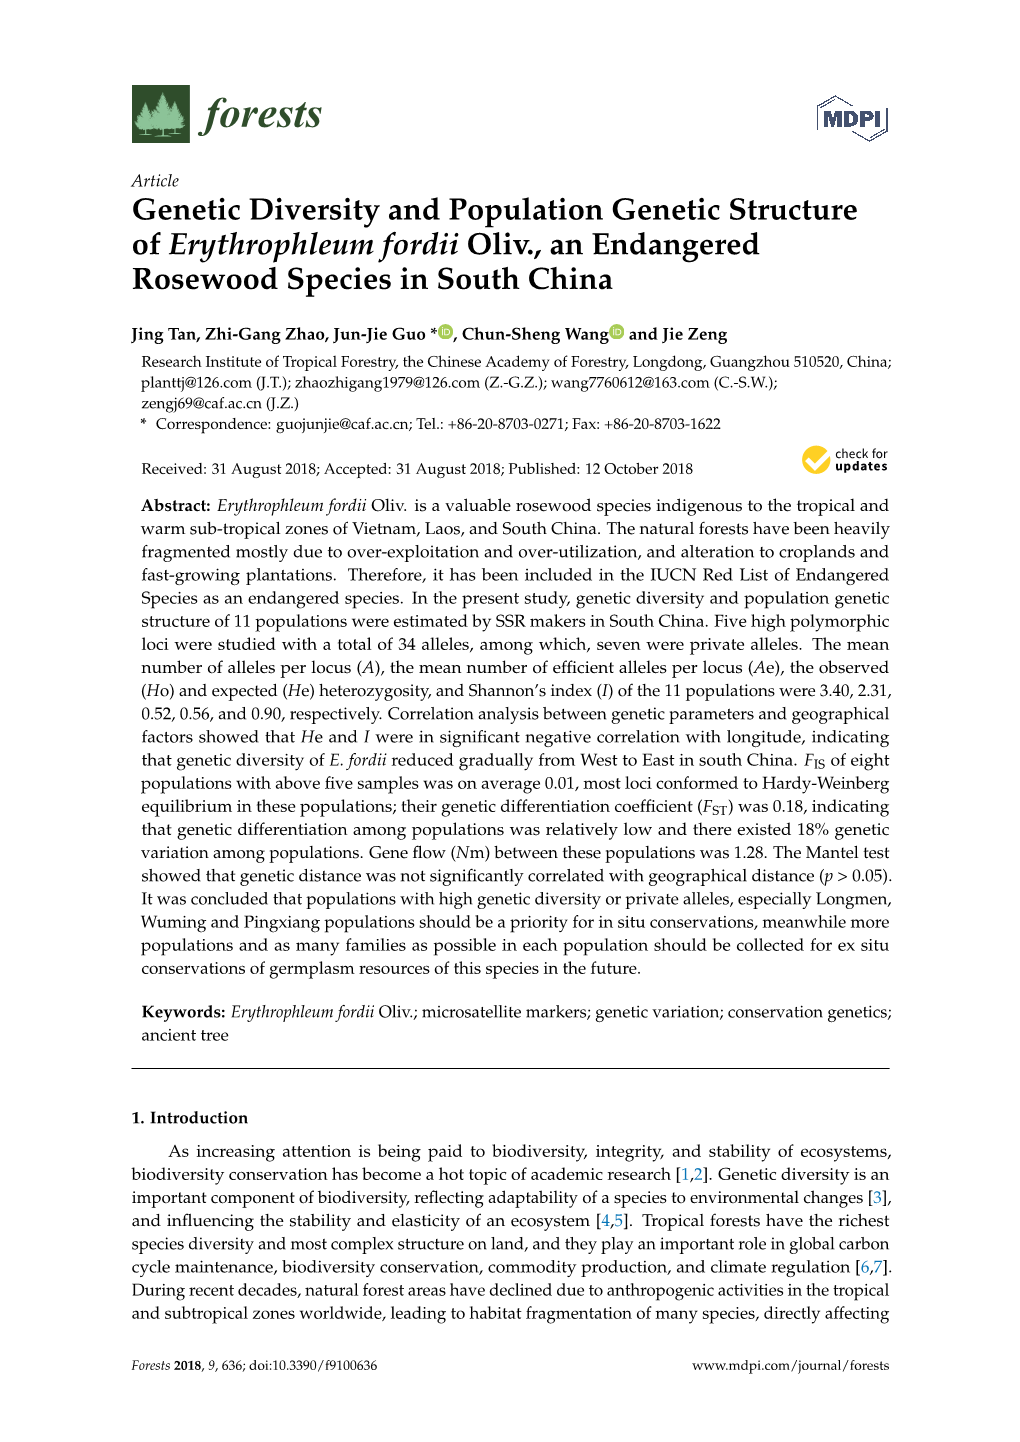 Genetic Diversity and Population Genetic Structure of Erythrophleum Fordii Oliv., an Endangered Rosewood Species in South China